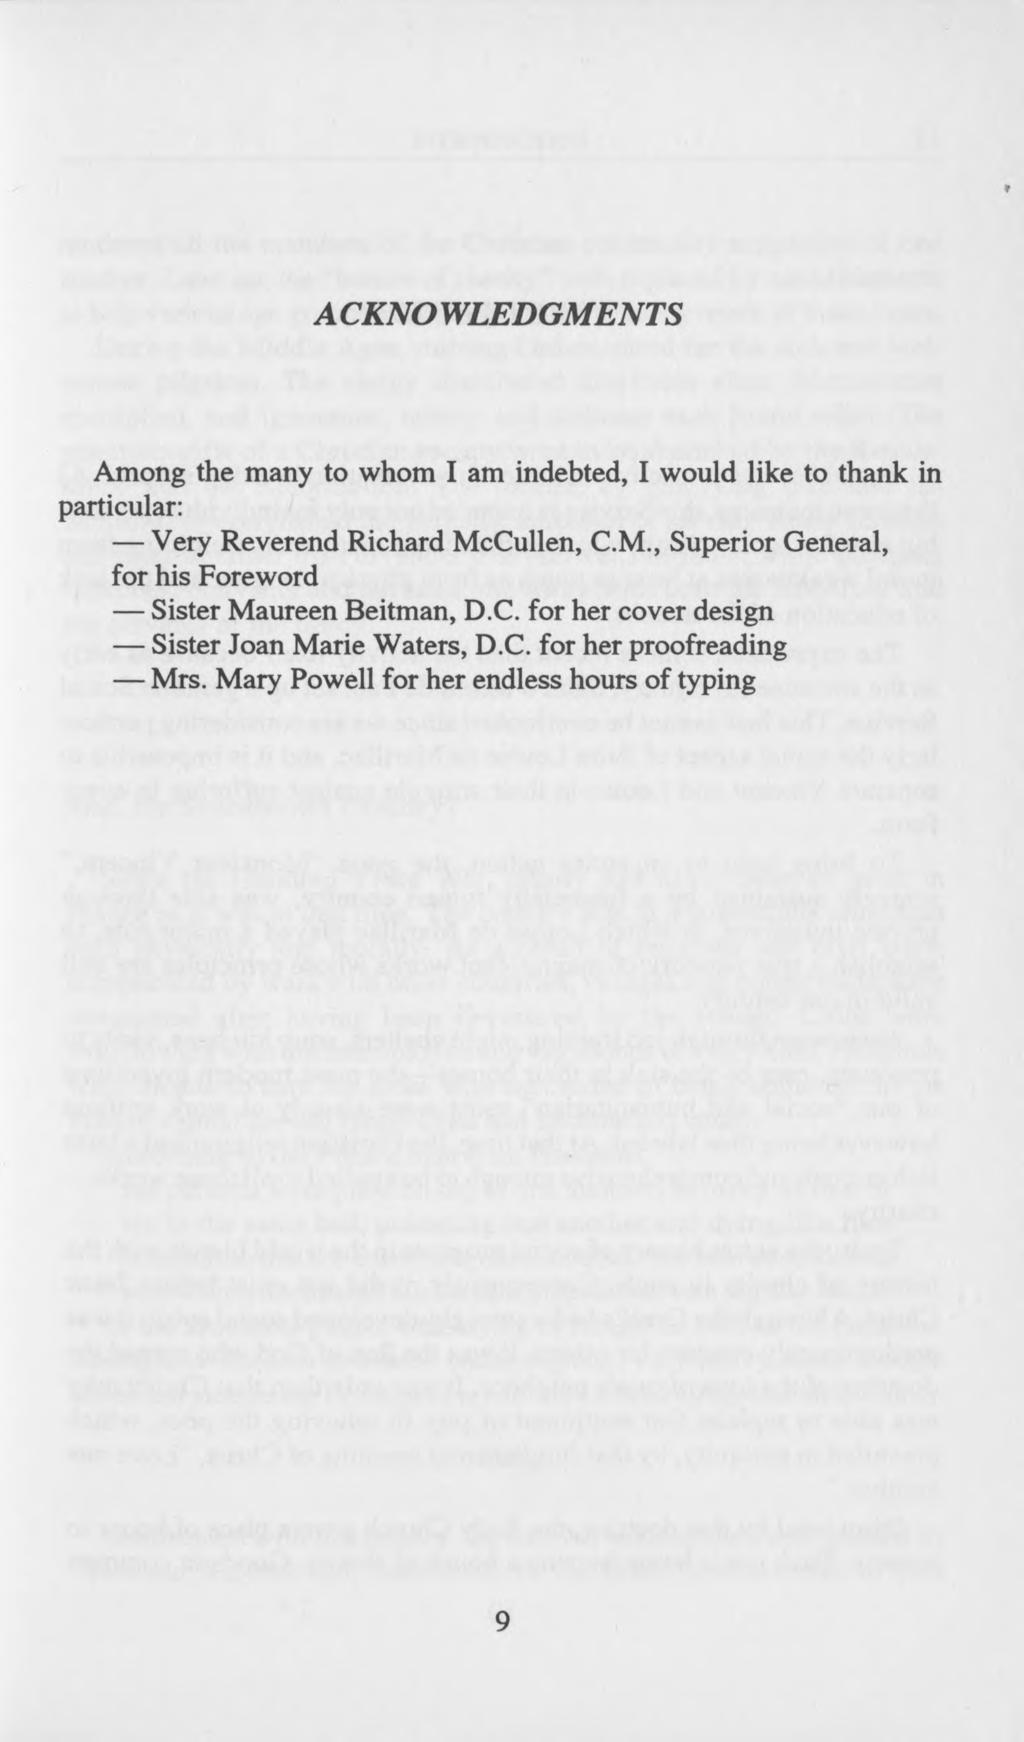 ACKNOWLEDGMENTS Among the many to whom I am indebted, I would like to thank in particular: Very Reverend Richard McCullen, C.M., Superior General, for his Foreword Sister Maureen Beitman, D.